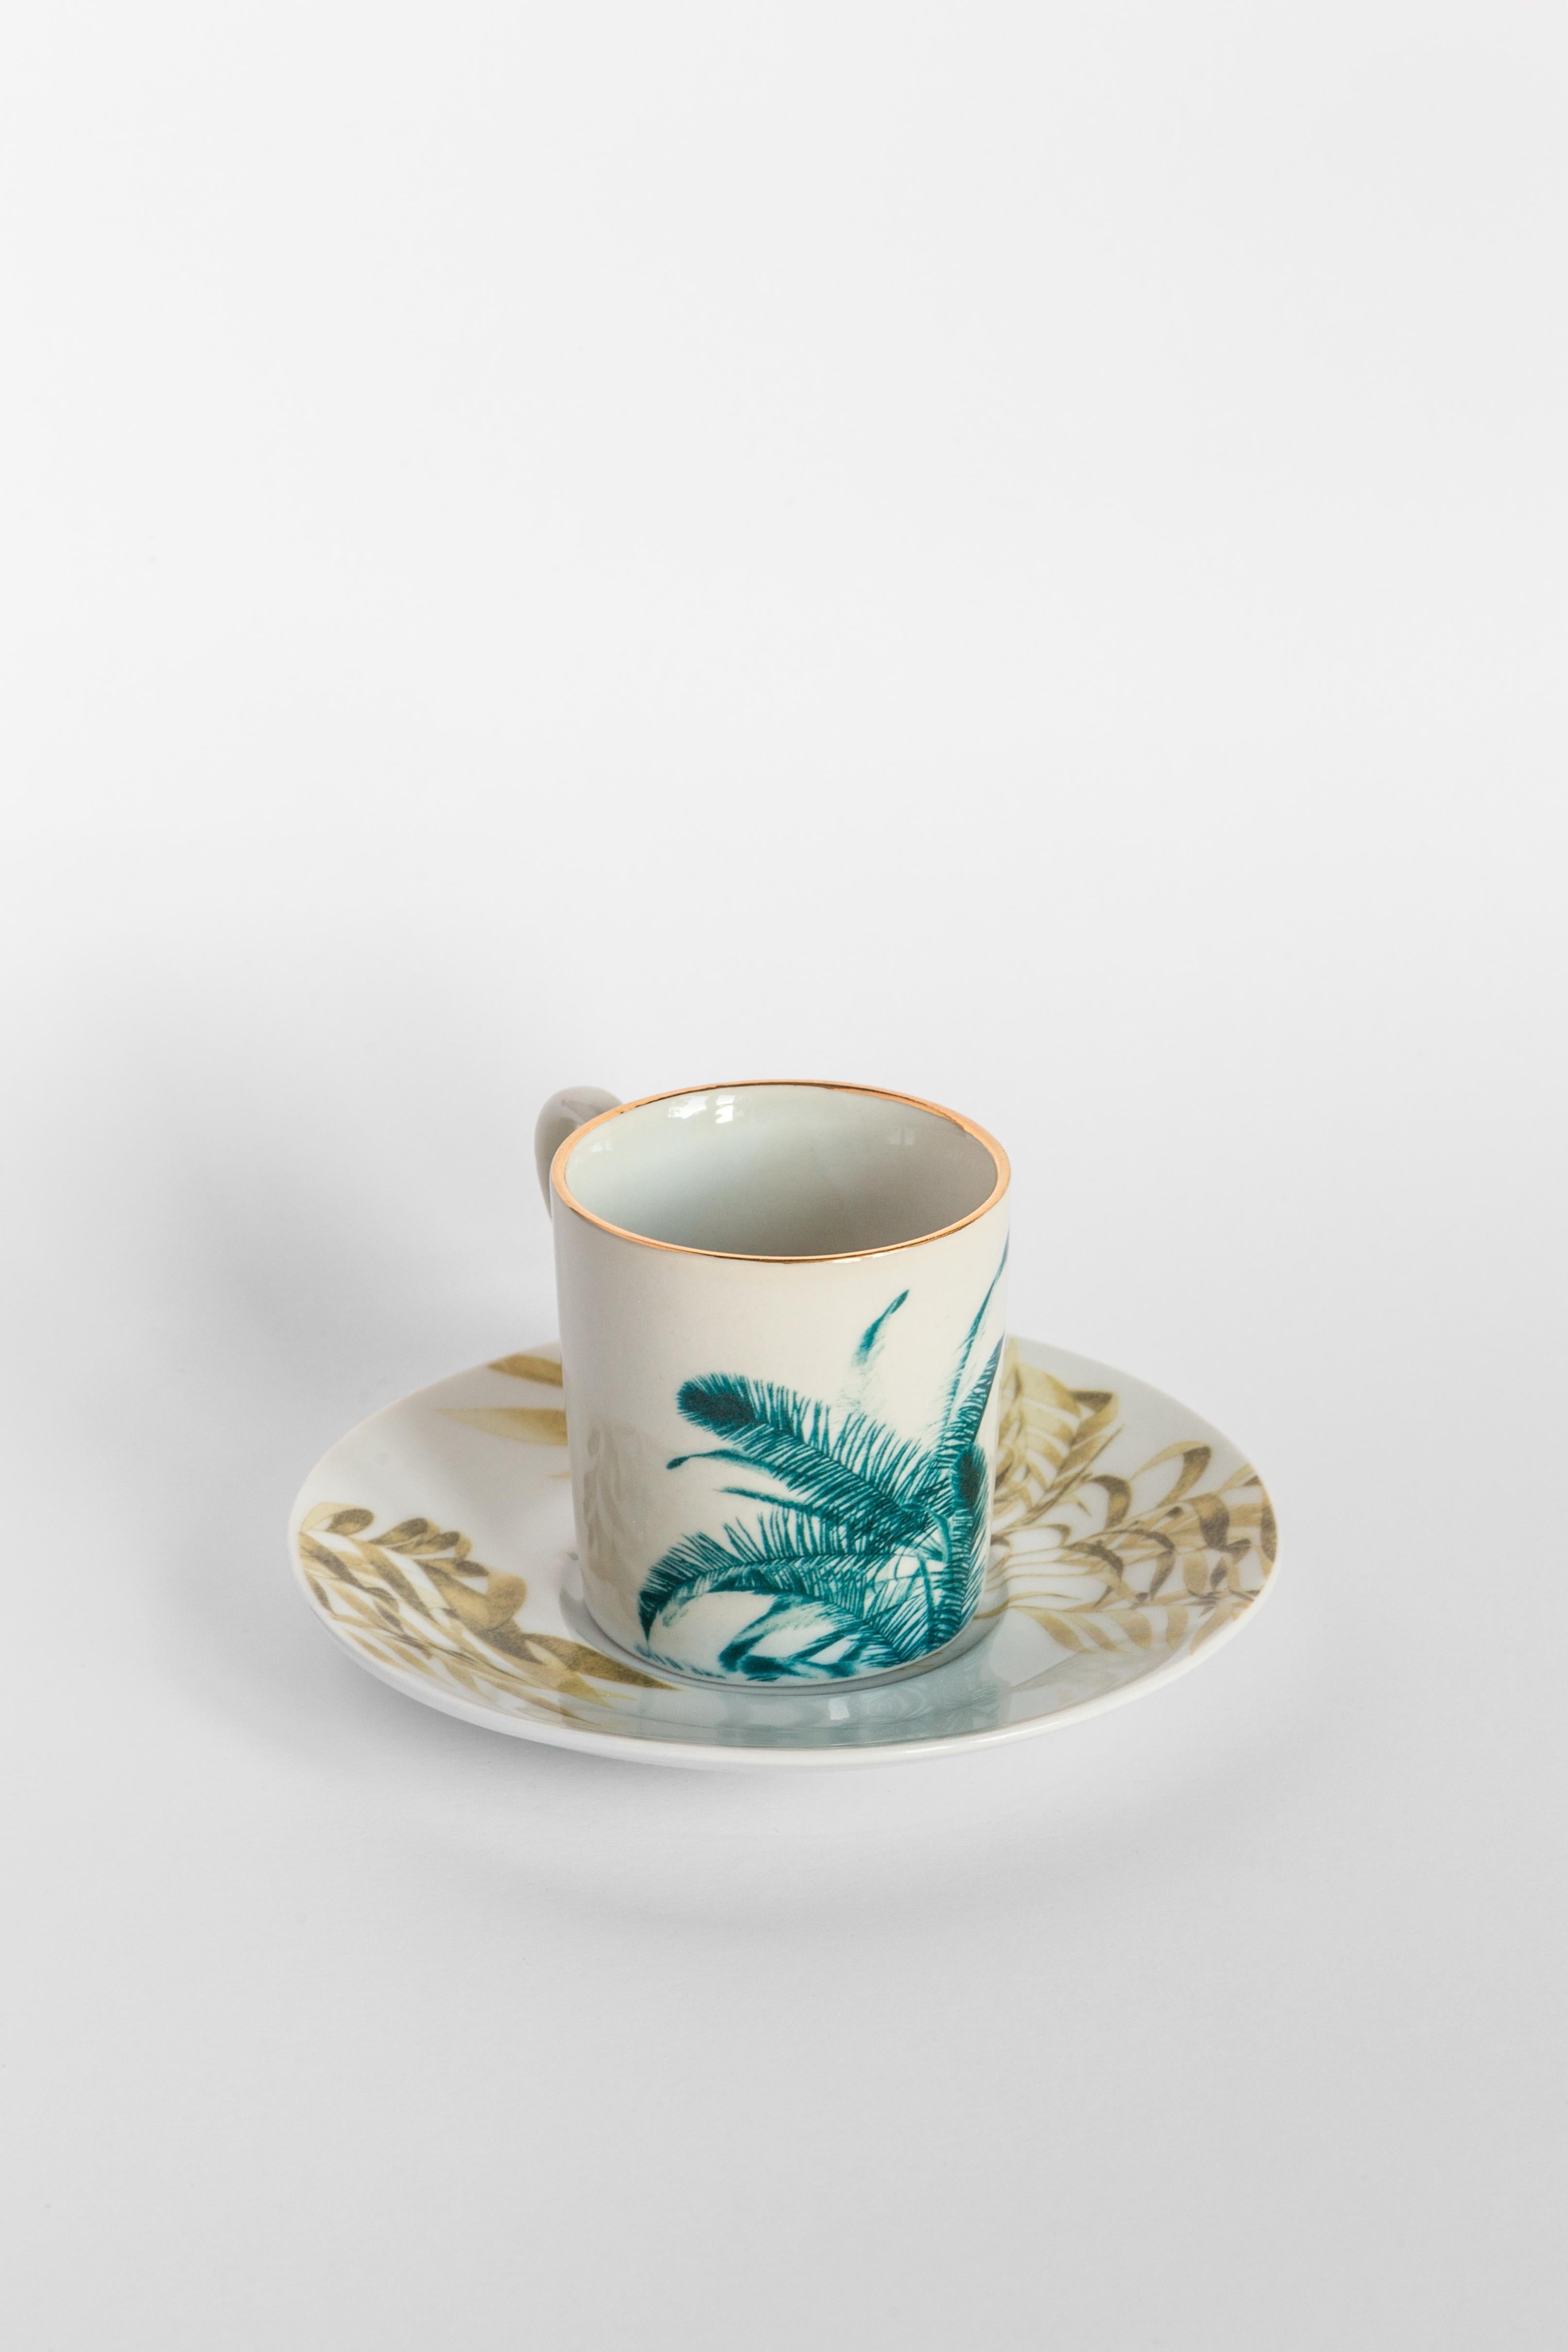 The Las Palmas Porcelain Collection owes its name to the city of Palmas, in Brazil. It is a true tribute to palm trees, whether it is their leaves, the whole plant, or even the landscape in which they live and thrive. The varied species represented